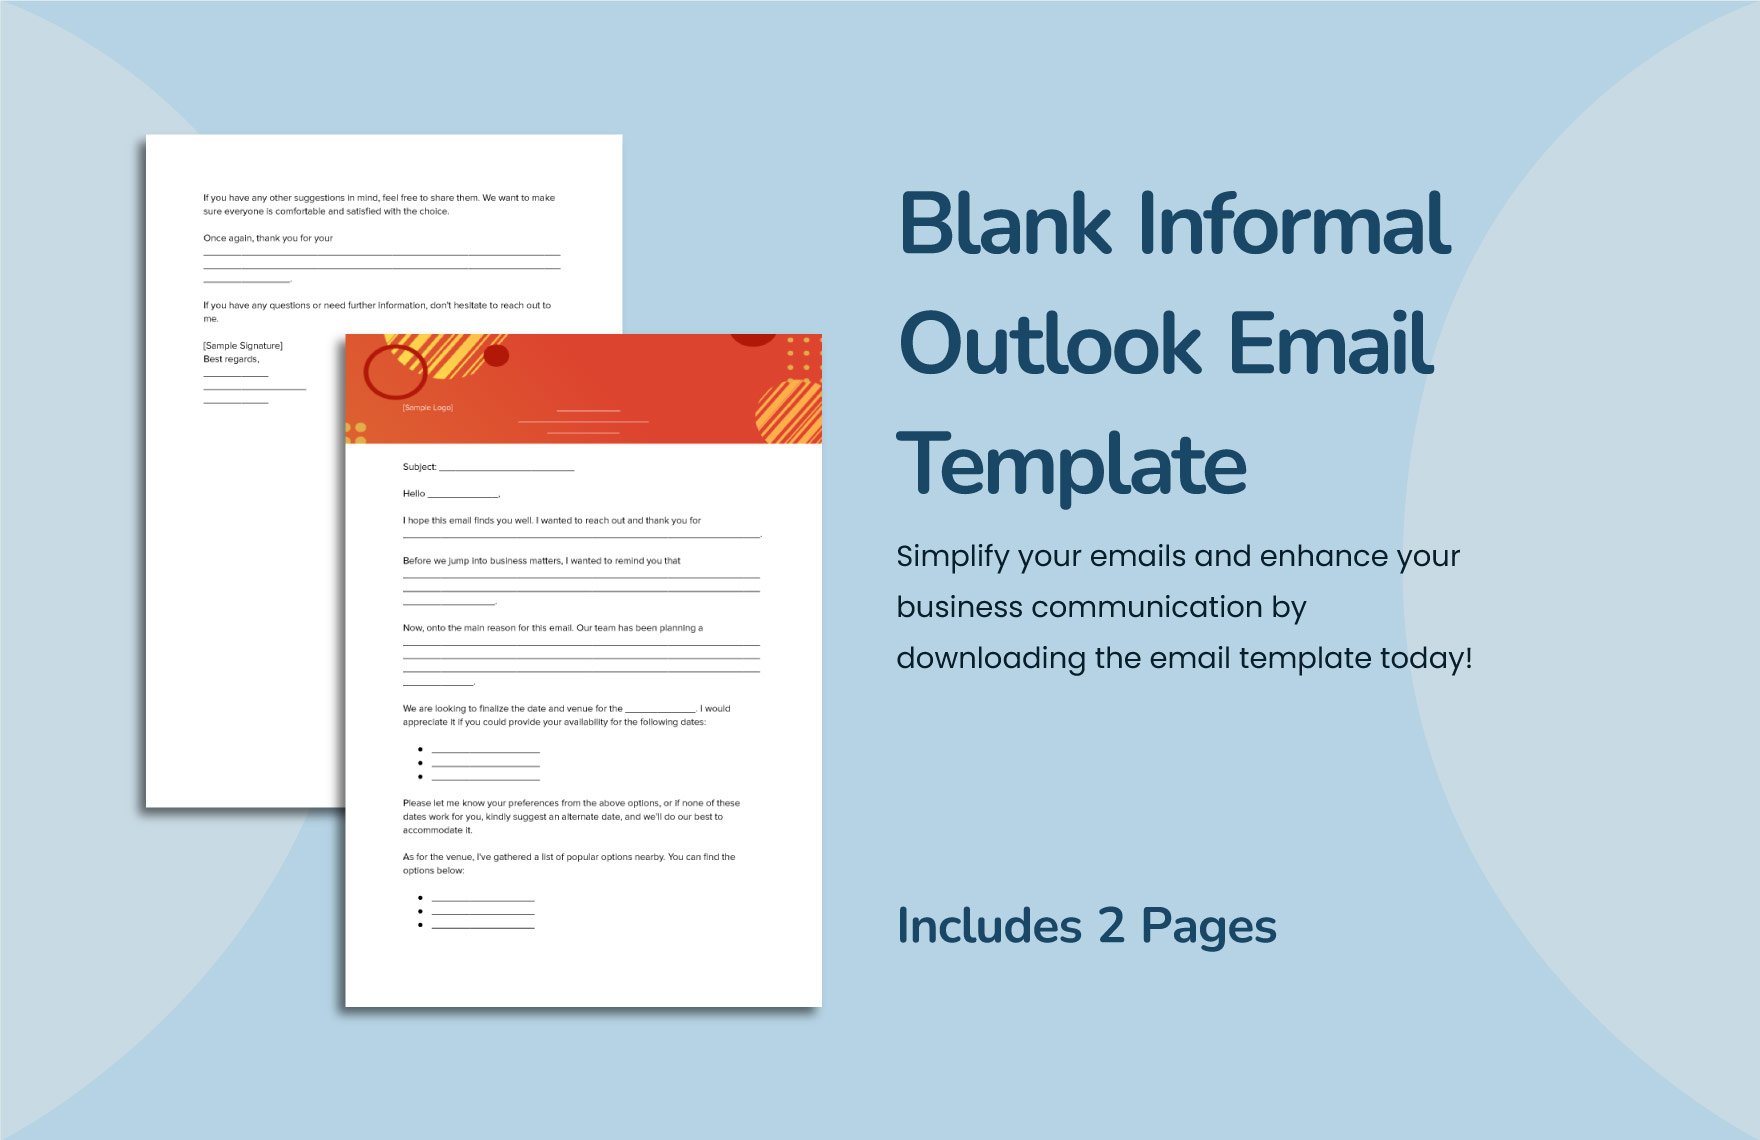 Blank Informal Outlook Email Template